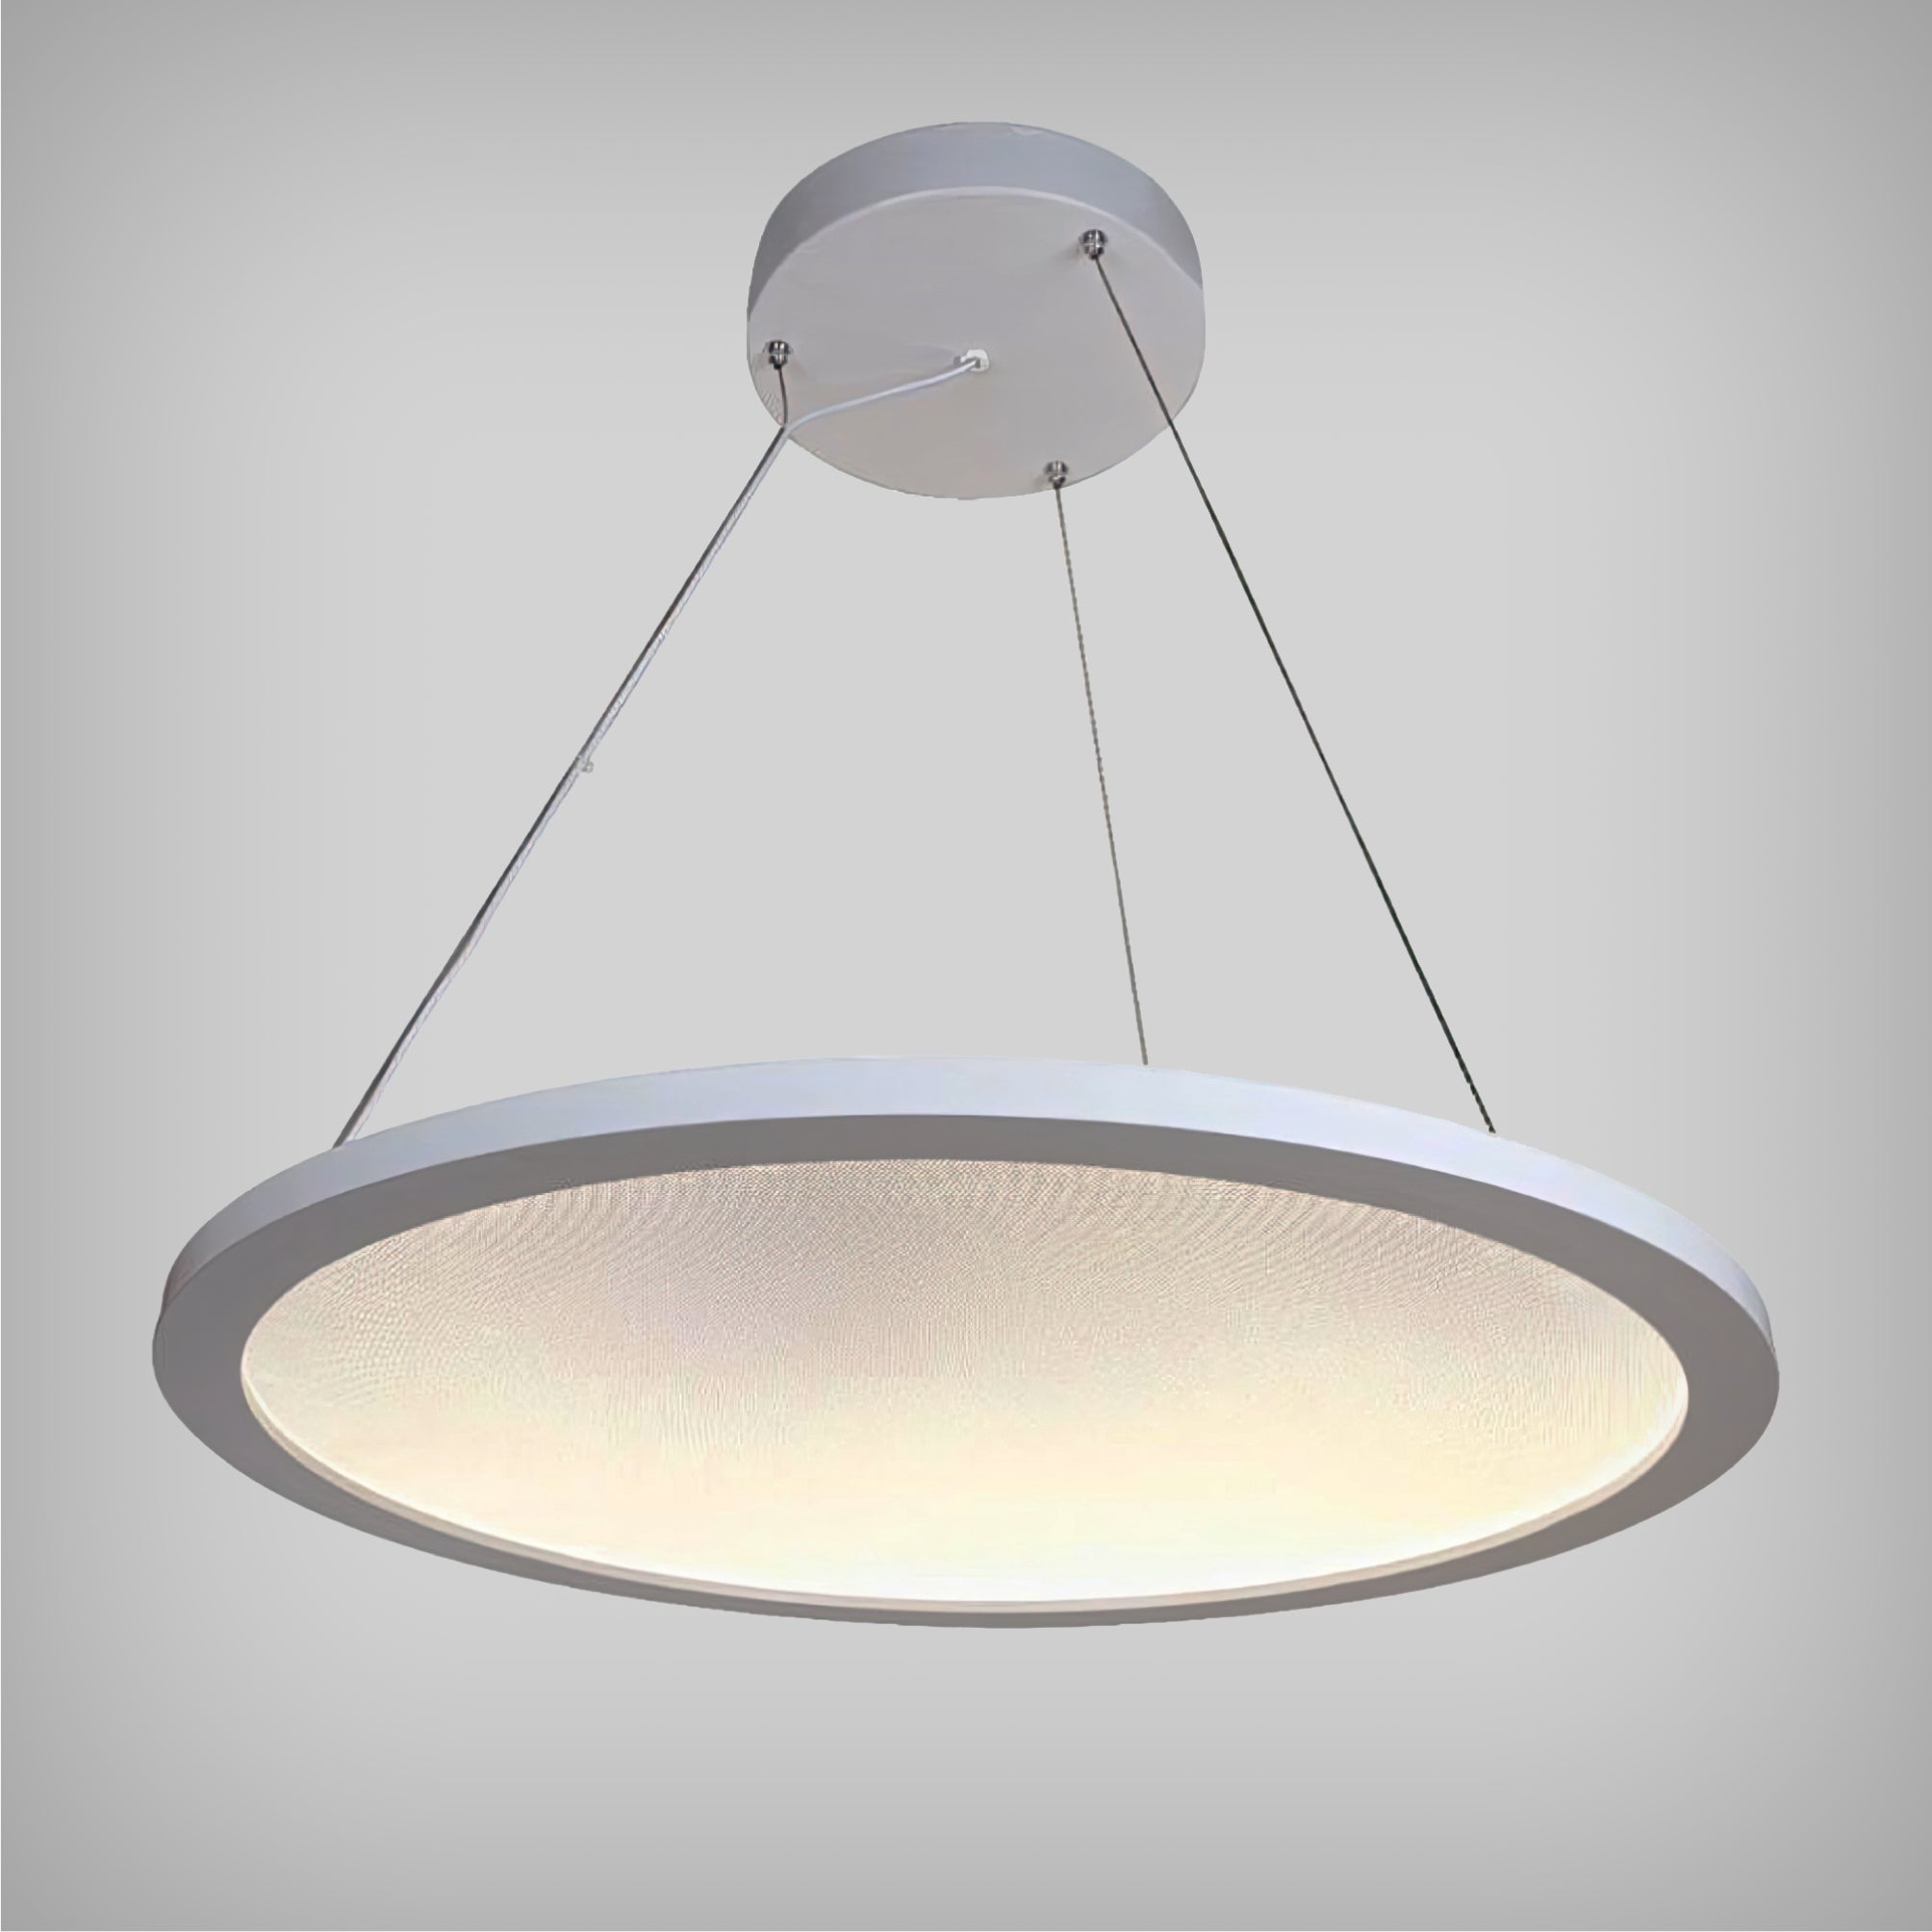 23-Inch Up and Down Light Decorative Disk